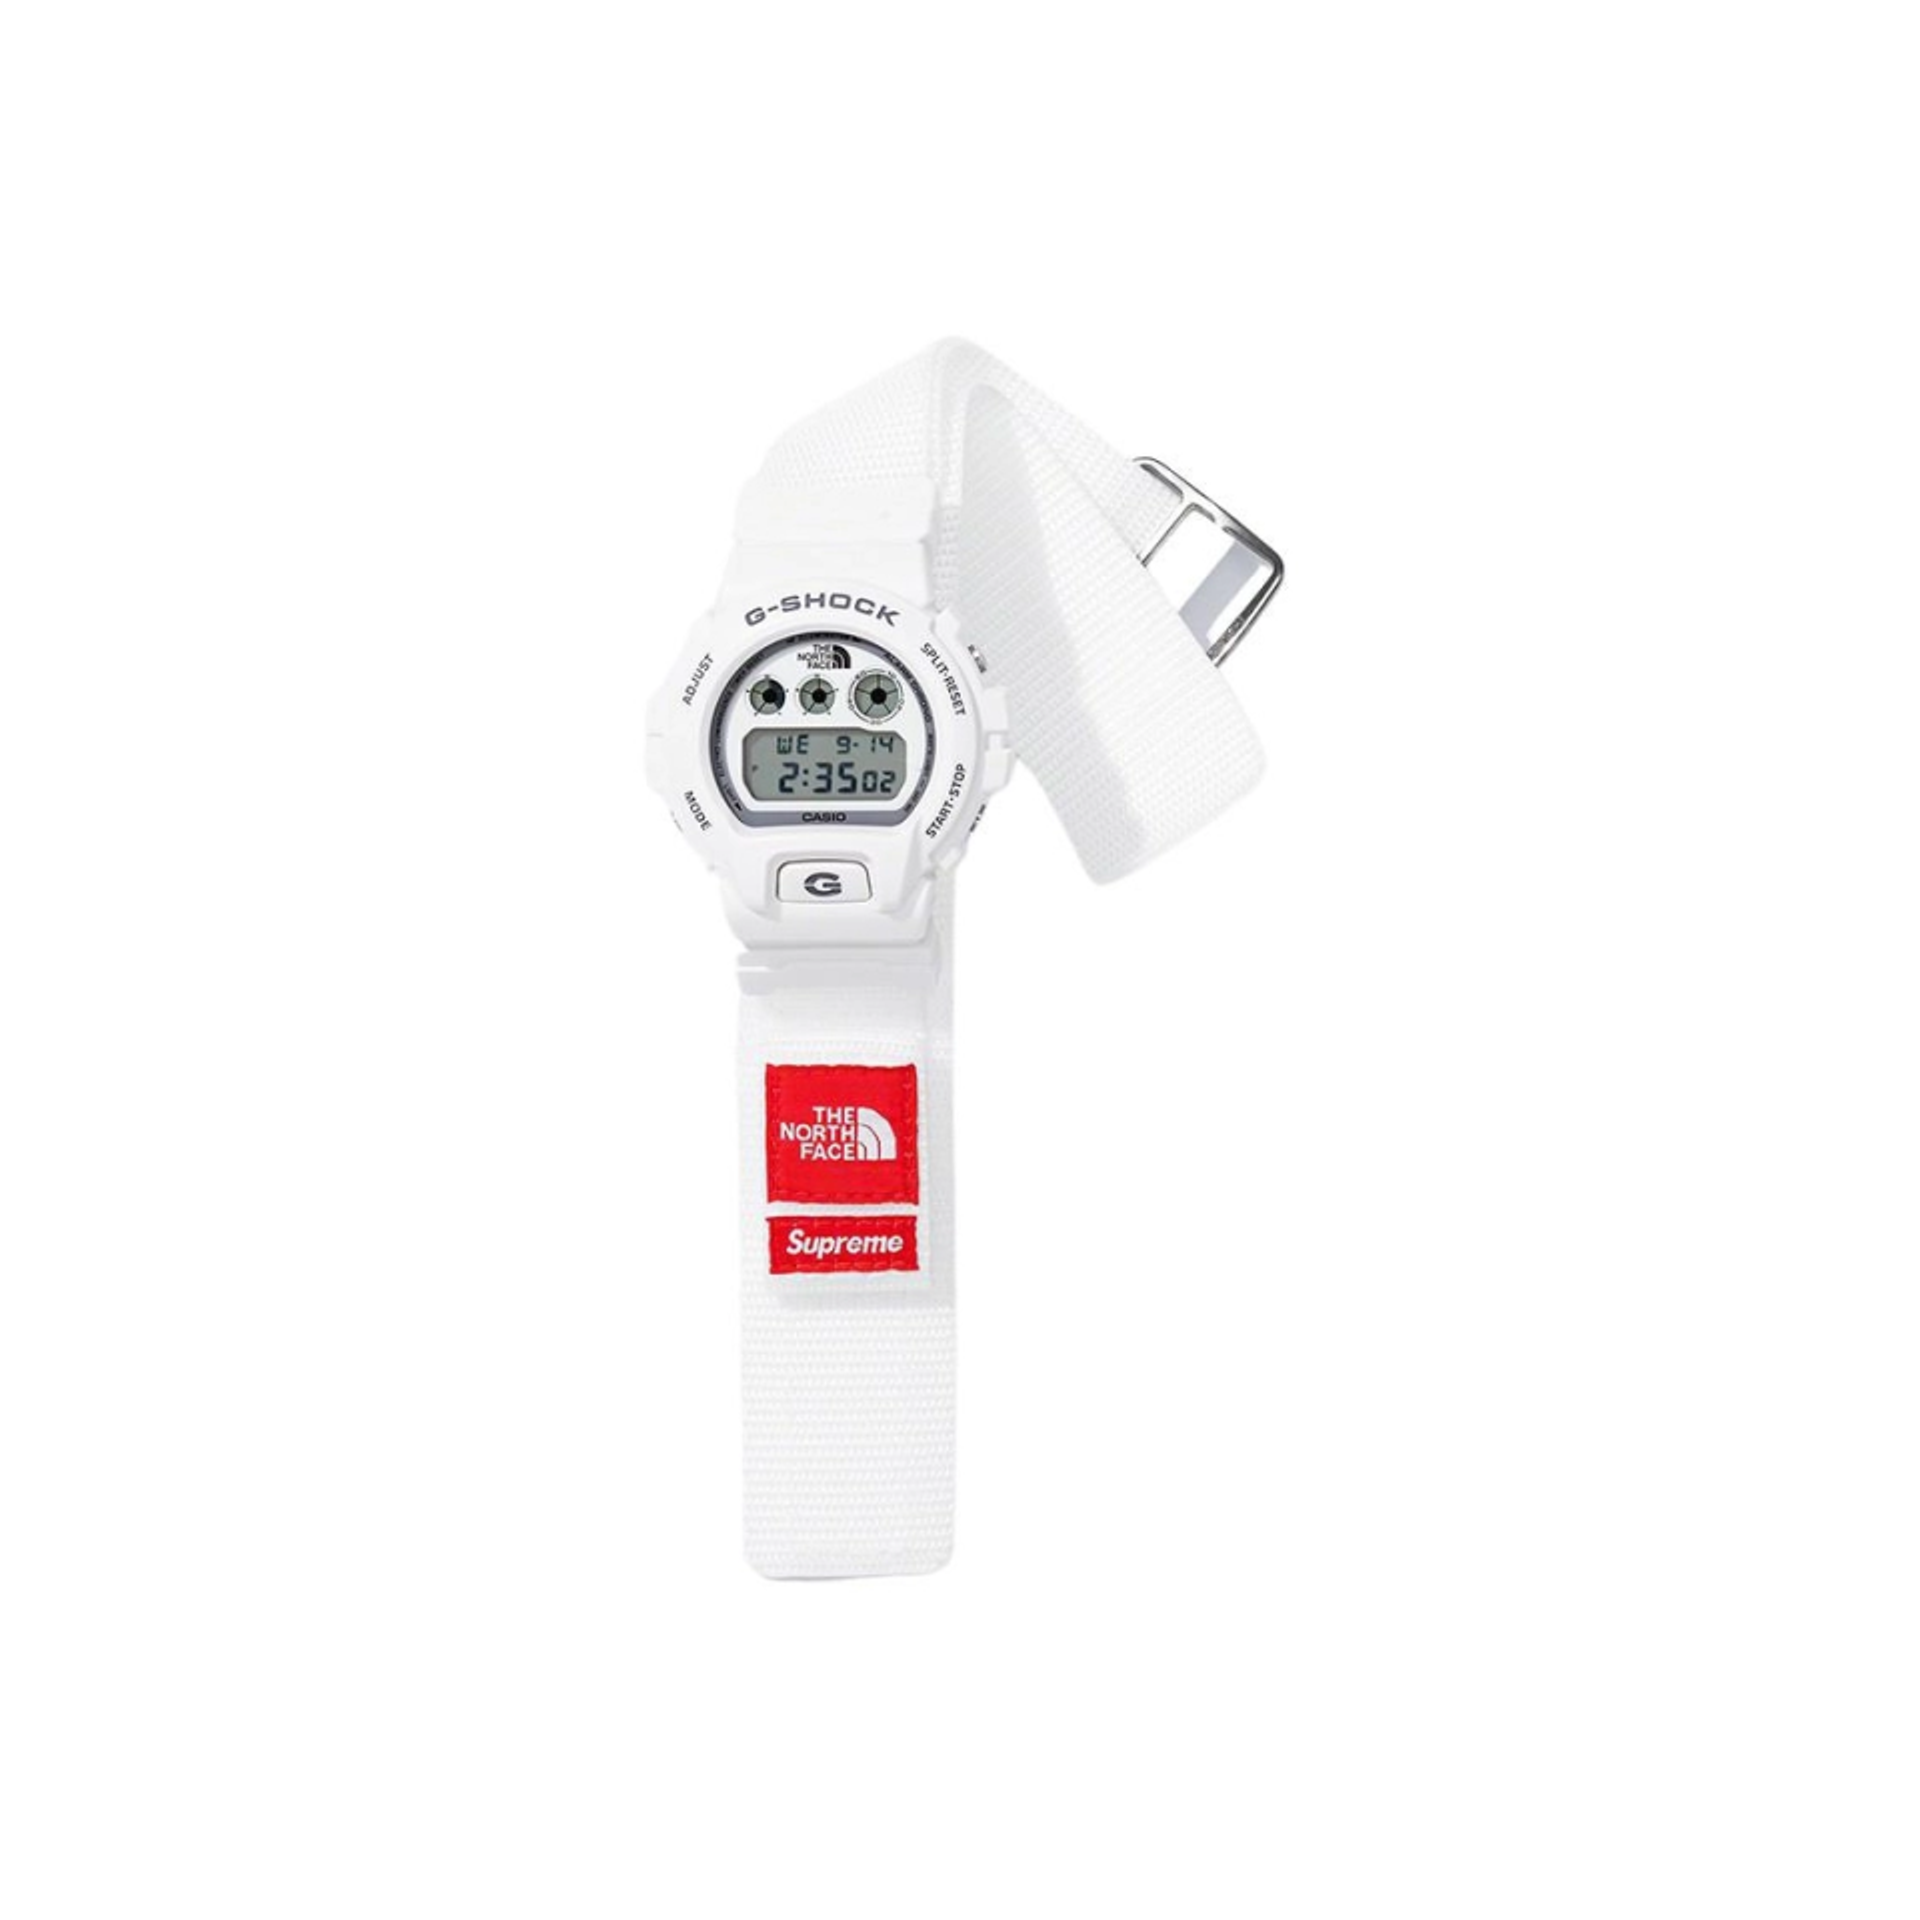  Supreme x The North Face x G-SHOCK Watch 'White'